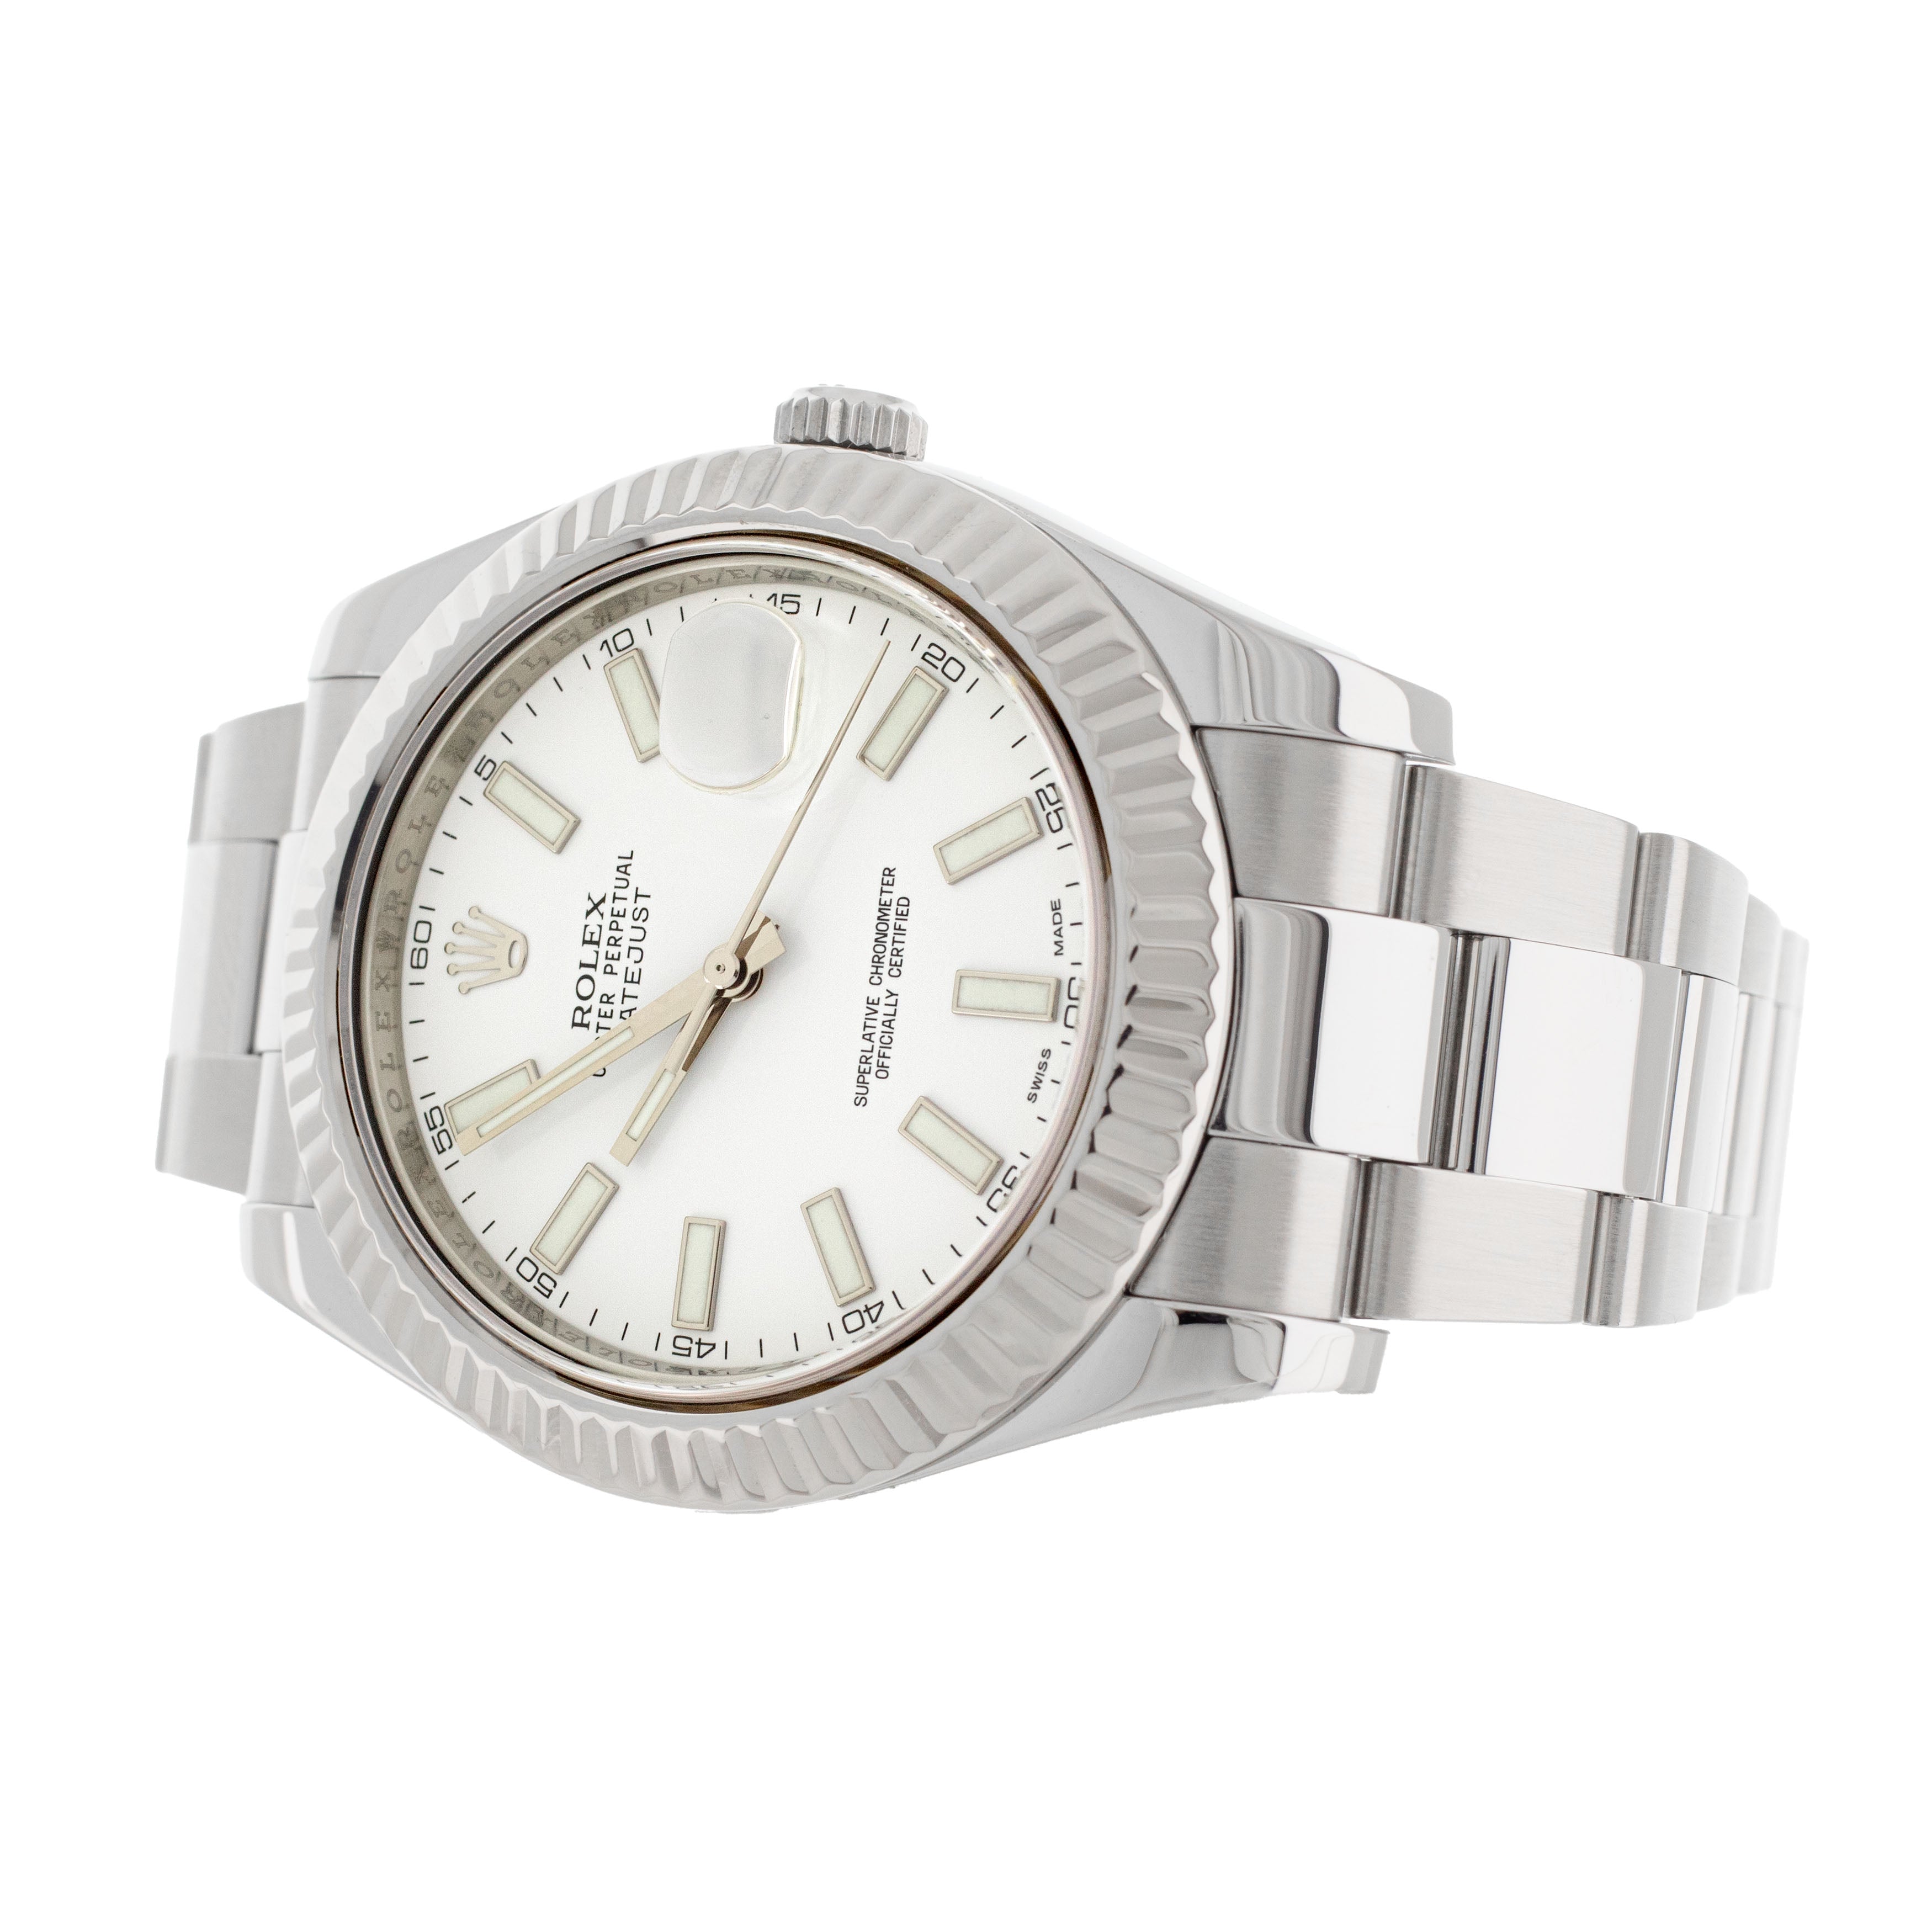 Rolex Datejust II Stainless Steel White Dial 41mm 116334 Full Set